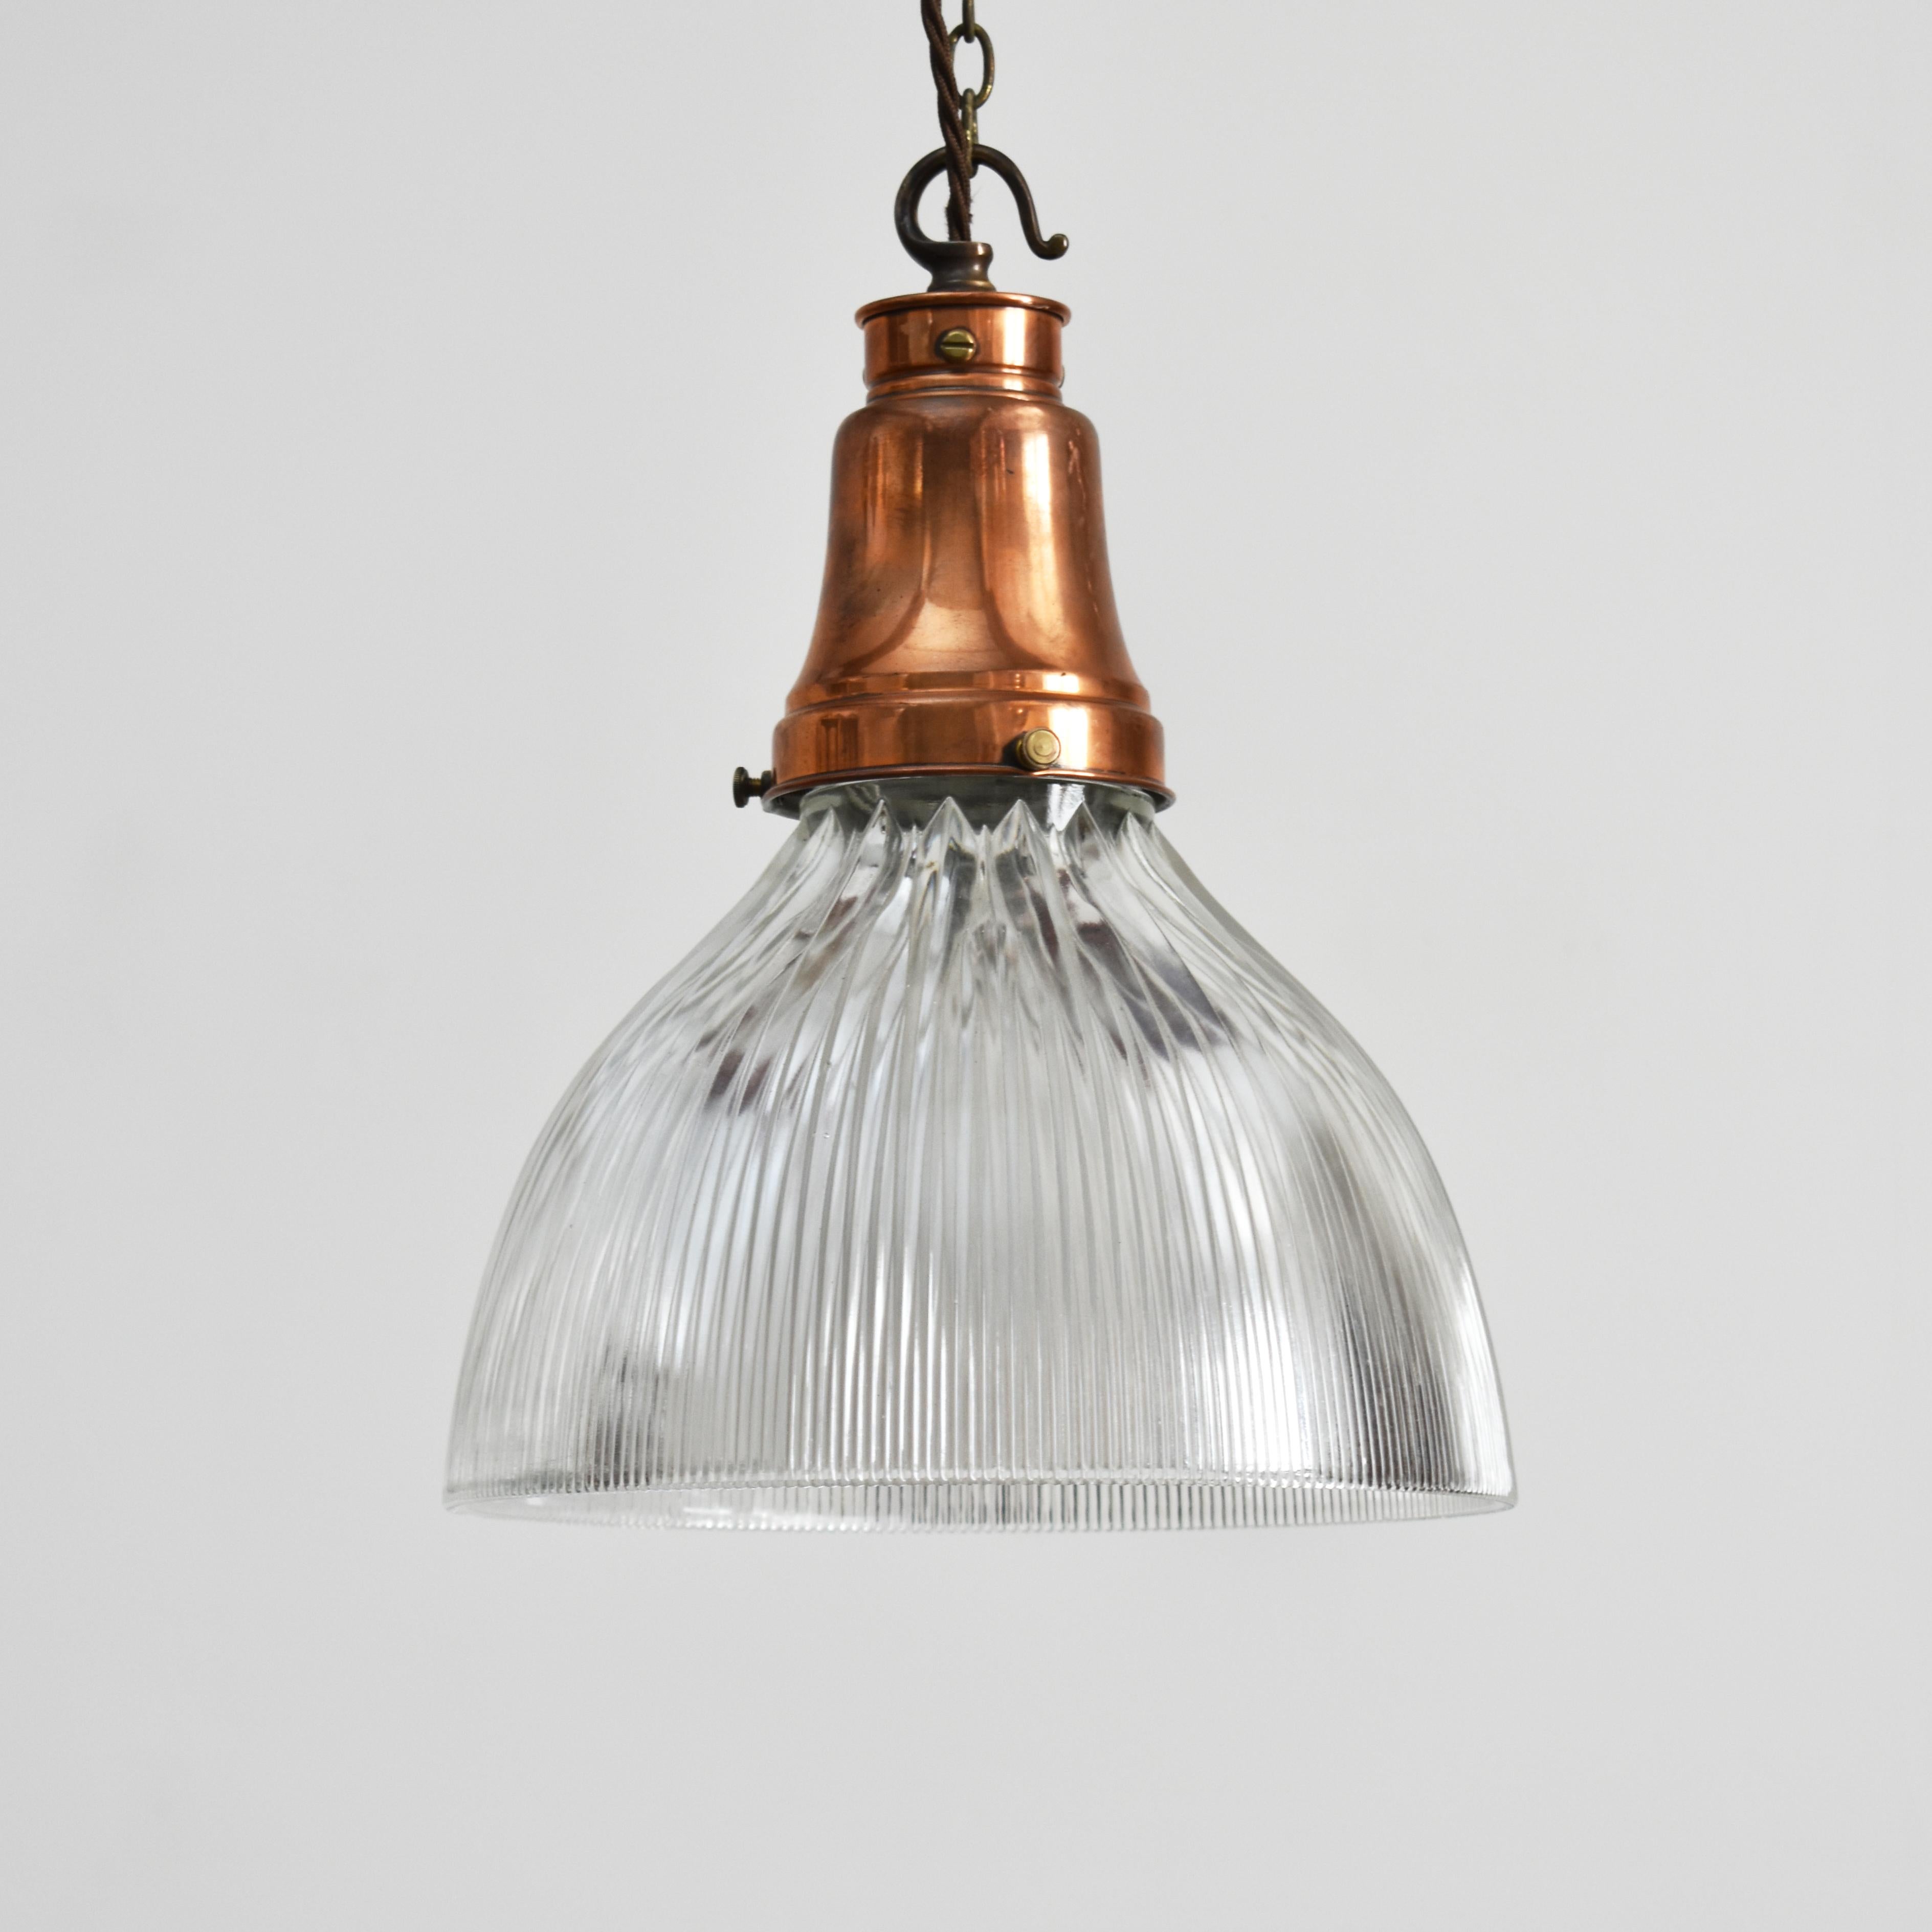 Antique Glass Holophane Pendant Light

A vintage bell pendant glass light Manufactured by ‘Holophane’. The glass prismatic shade looks great both lit and unlit. The light has retained its original copper GEC gallery.

Dimensions:
Height: